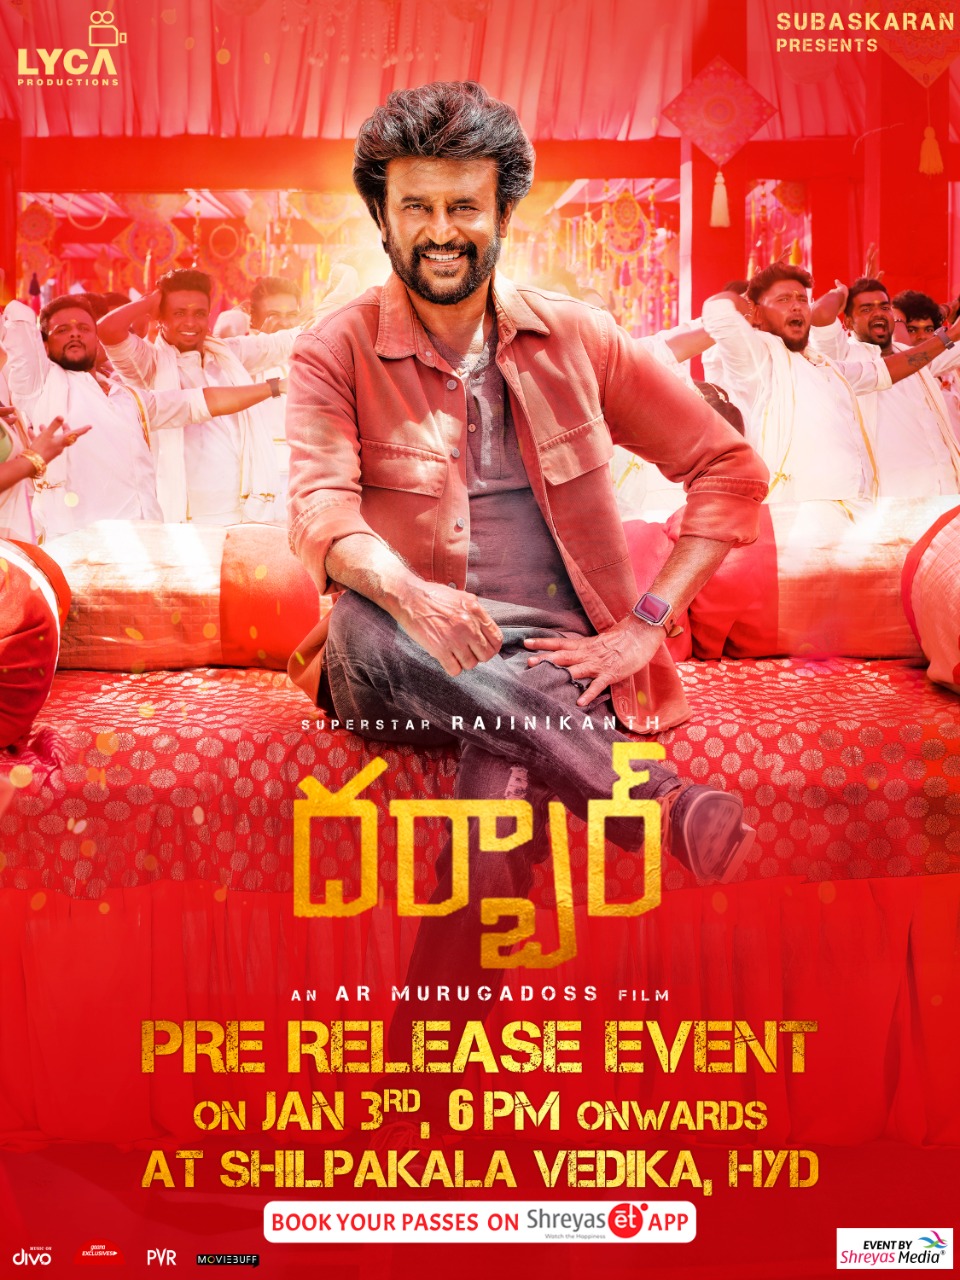 Pre-Release function of Rajinikanth’s ‘Darbar’ in Hyderabad on January 3